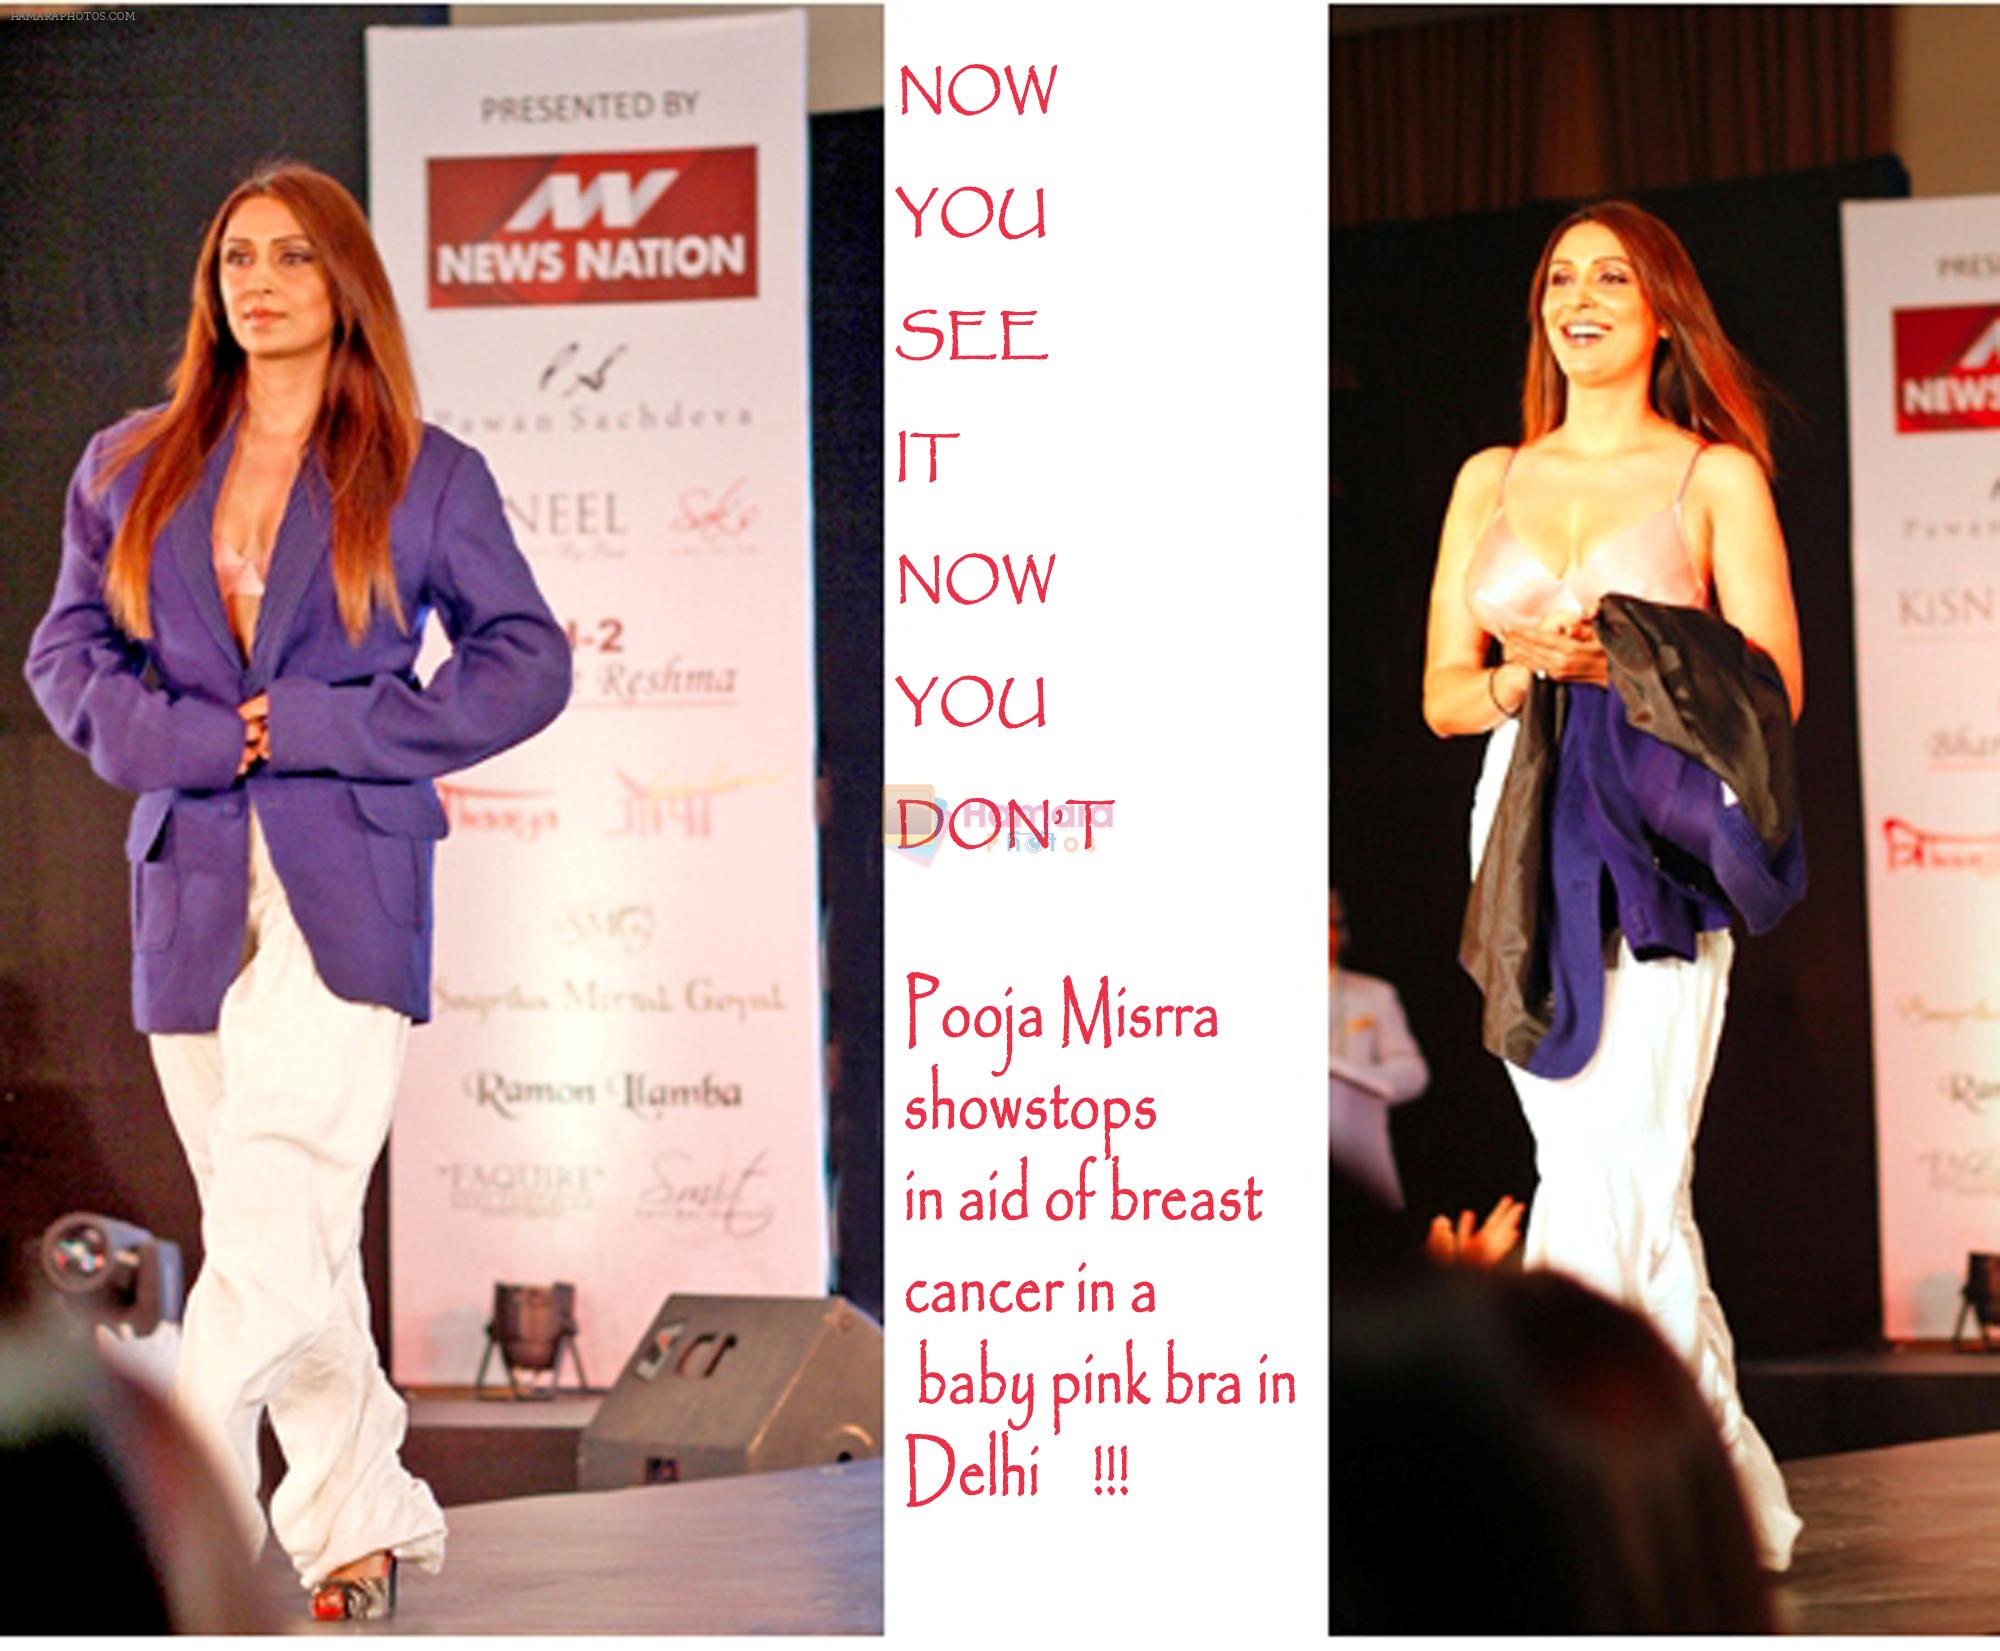 Pooja Misra a showstopper in a baby pink bra in aid of breast cancer in Delhi on 13th May 2013